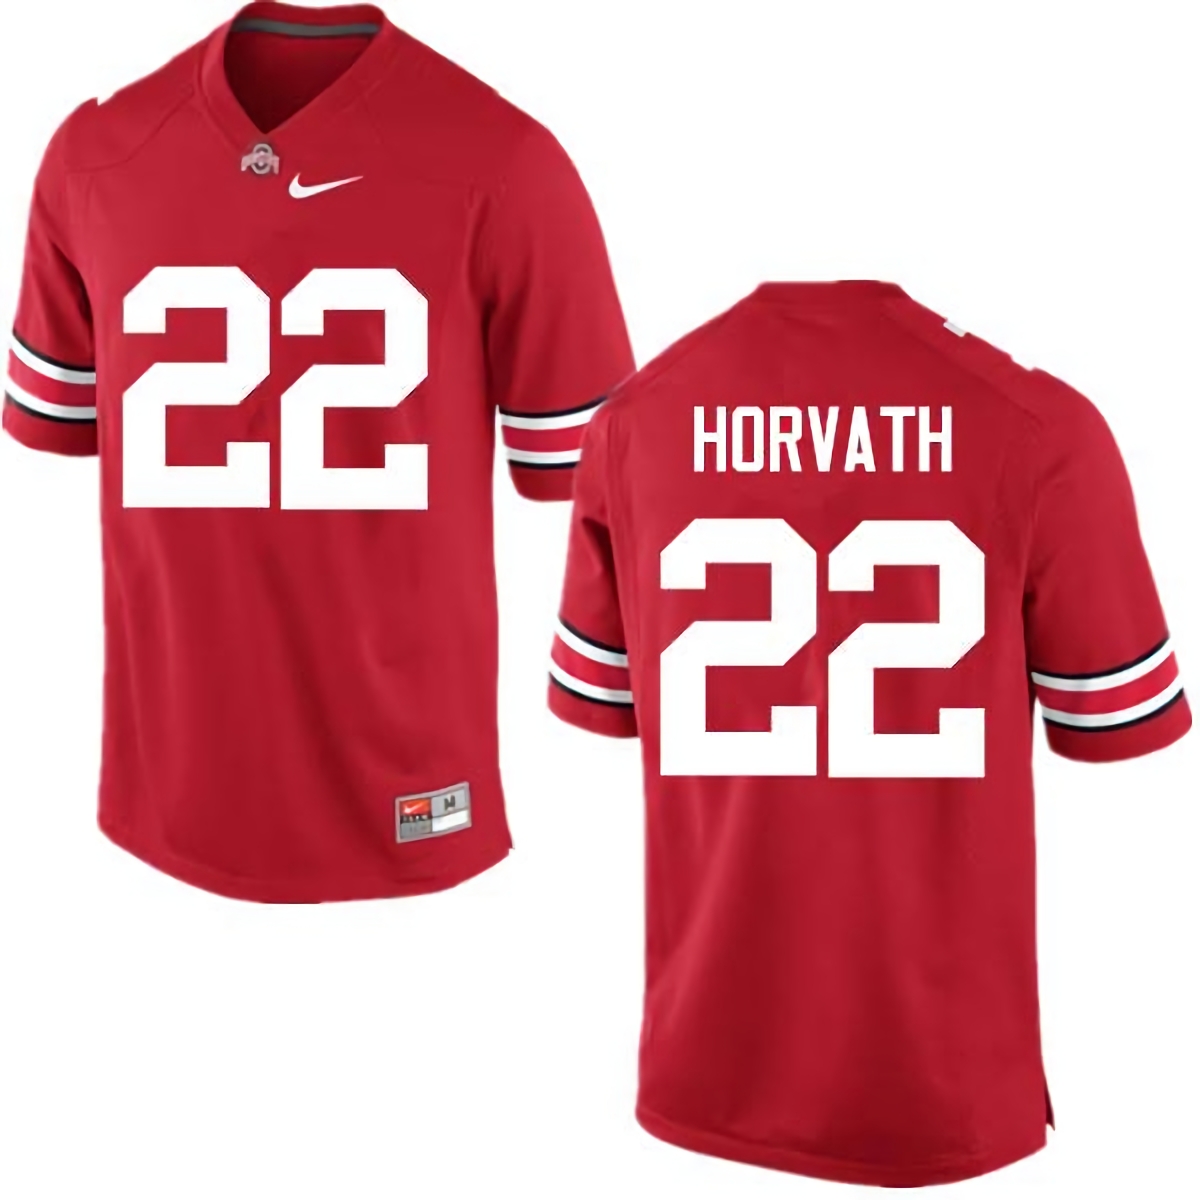 Les Horvath Ohio State Buckeyes Men's NCAA #22 Nike Red College Stitched Football Jersey JUG7856JR